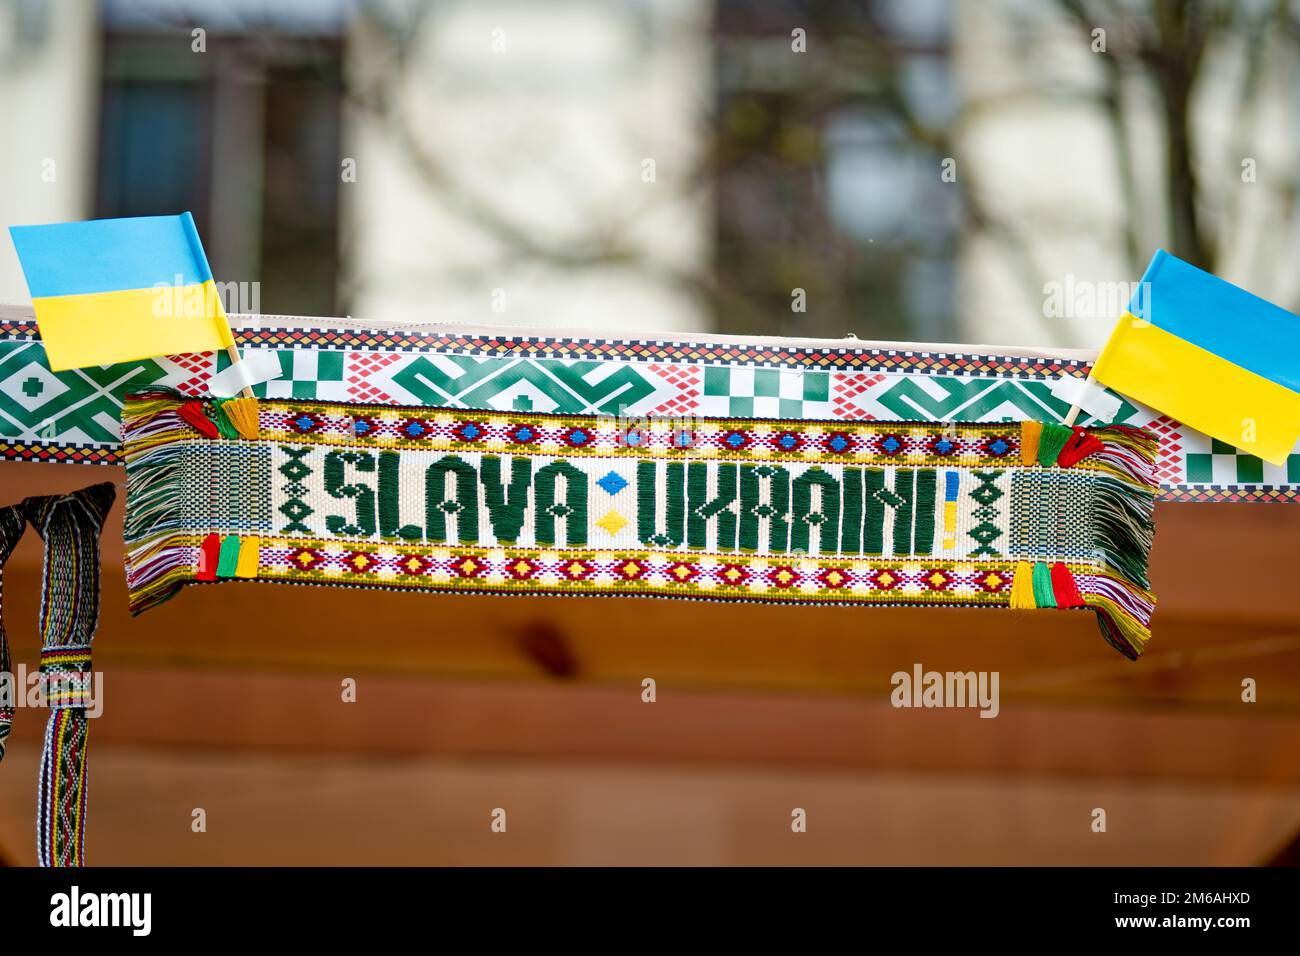 Ukrainian flags on a traditional Easter fair in Lithuania. Lithuanians support Ukrainian people. Colorful Lithuanian weave saying 'Glory to Ukraine'. Stock Photo